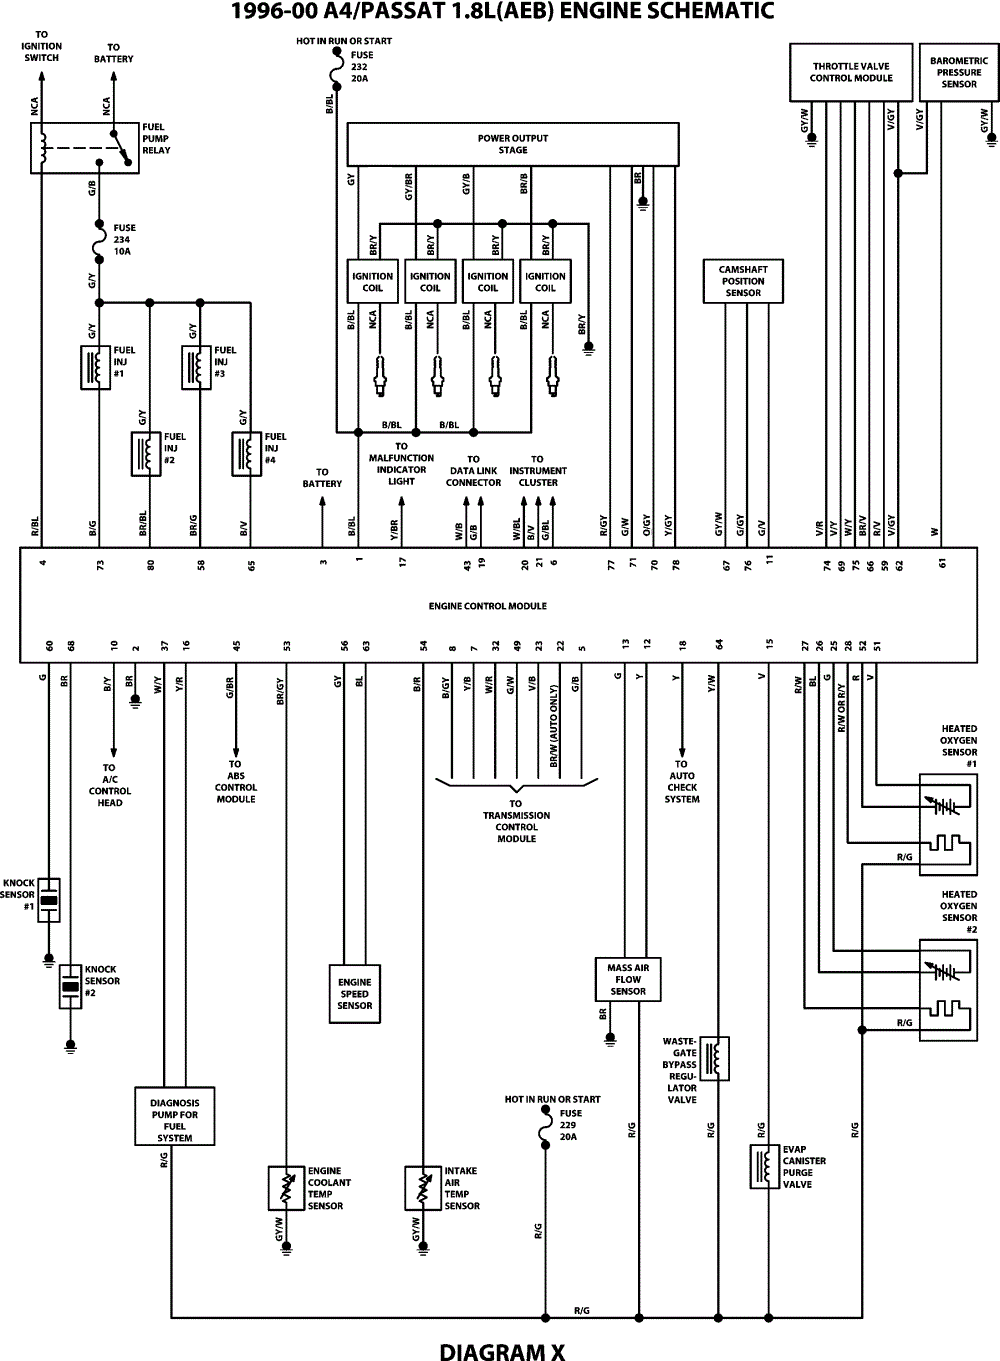 Wiring Diagram For P1000 Motorcycle from www.audi-sport.net